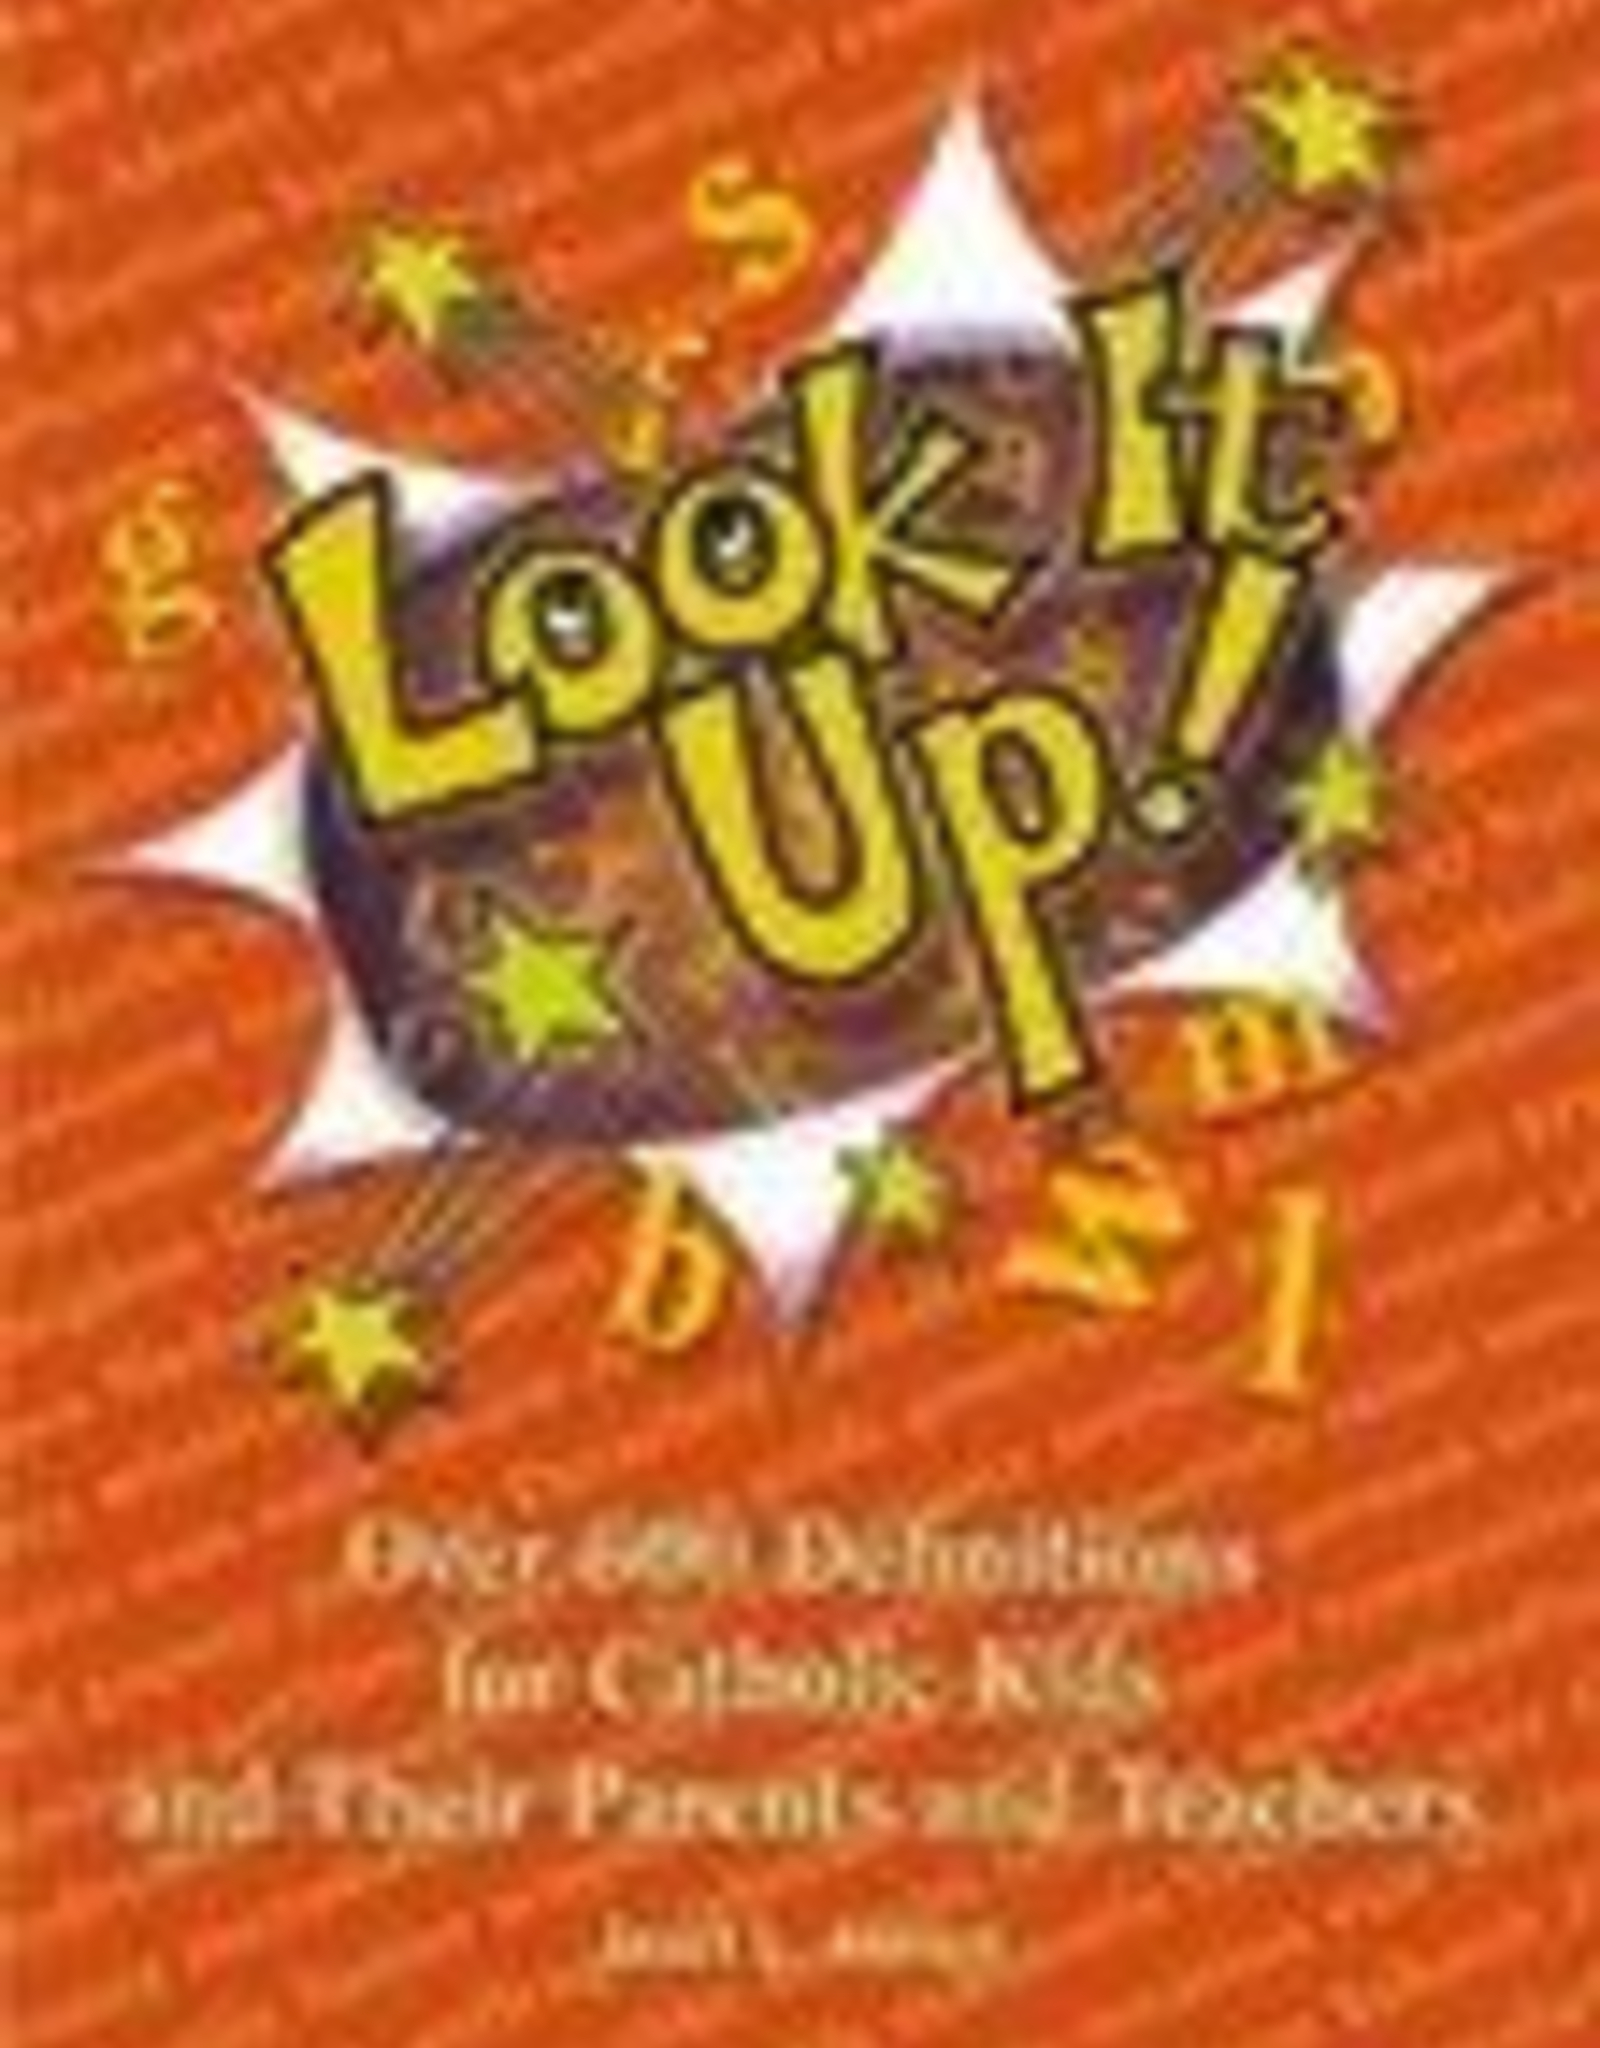 Pauline Look It Up! Over 600 Definitions for Catholic Kids and their Parents and Teachers, By Janet L. Alampi